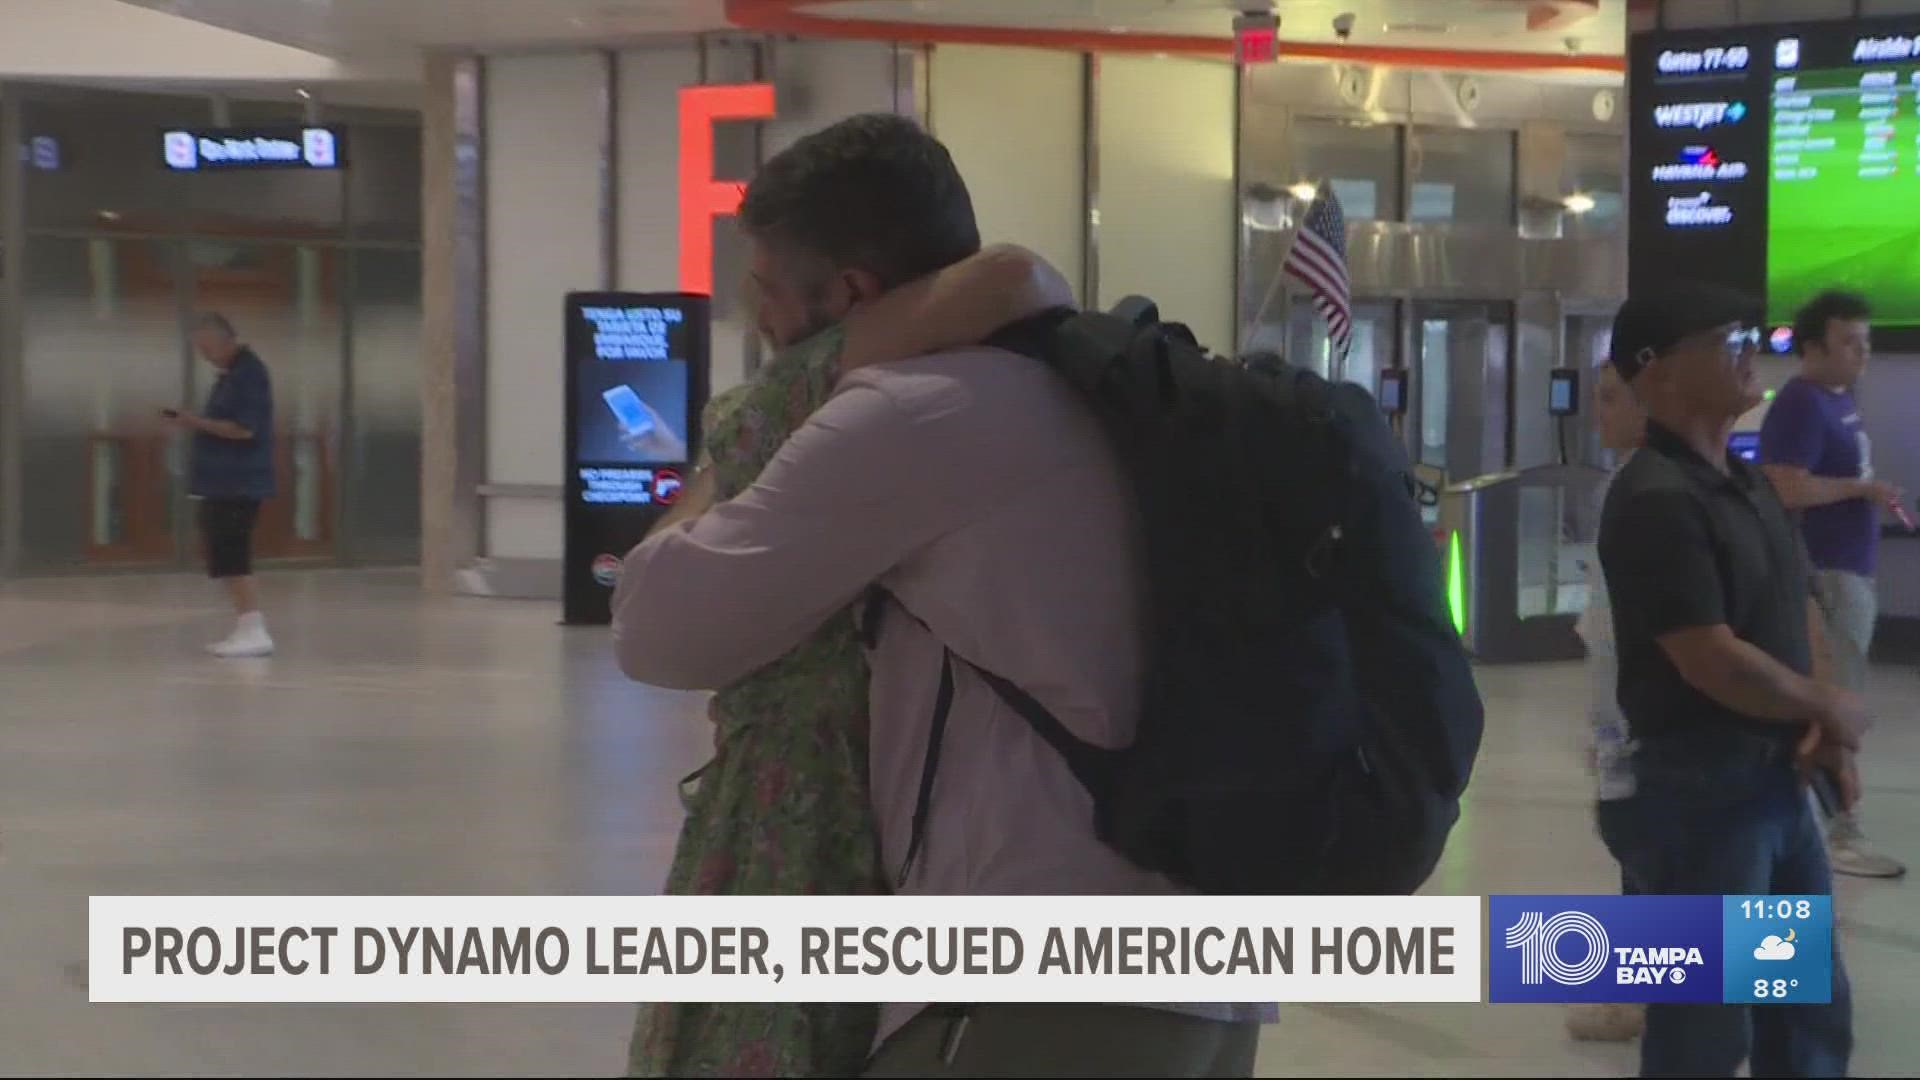 The homecoming is not the end of DYNAMO's rescues. They still have crews overseas performing rescues now.